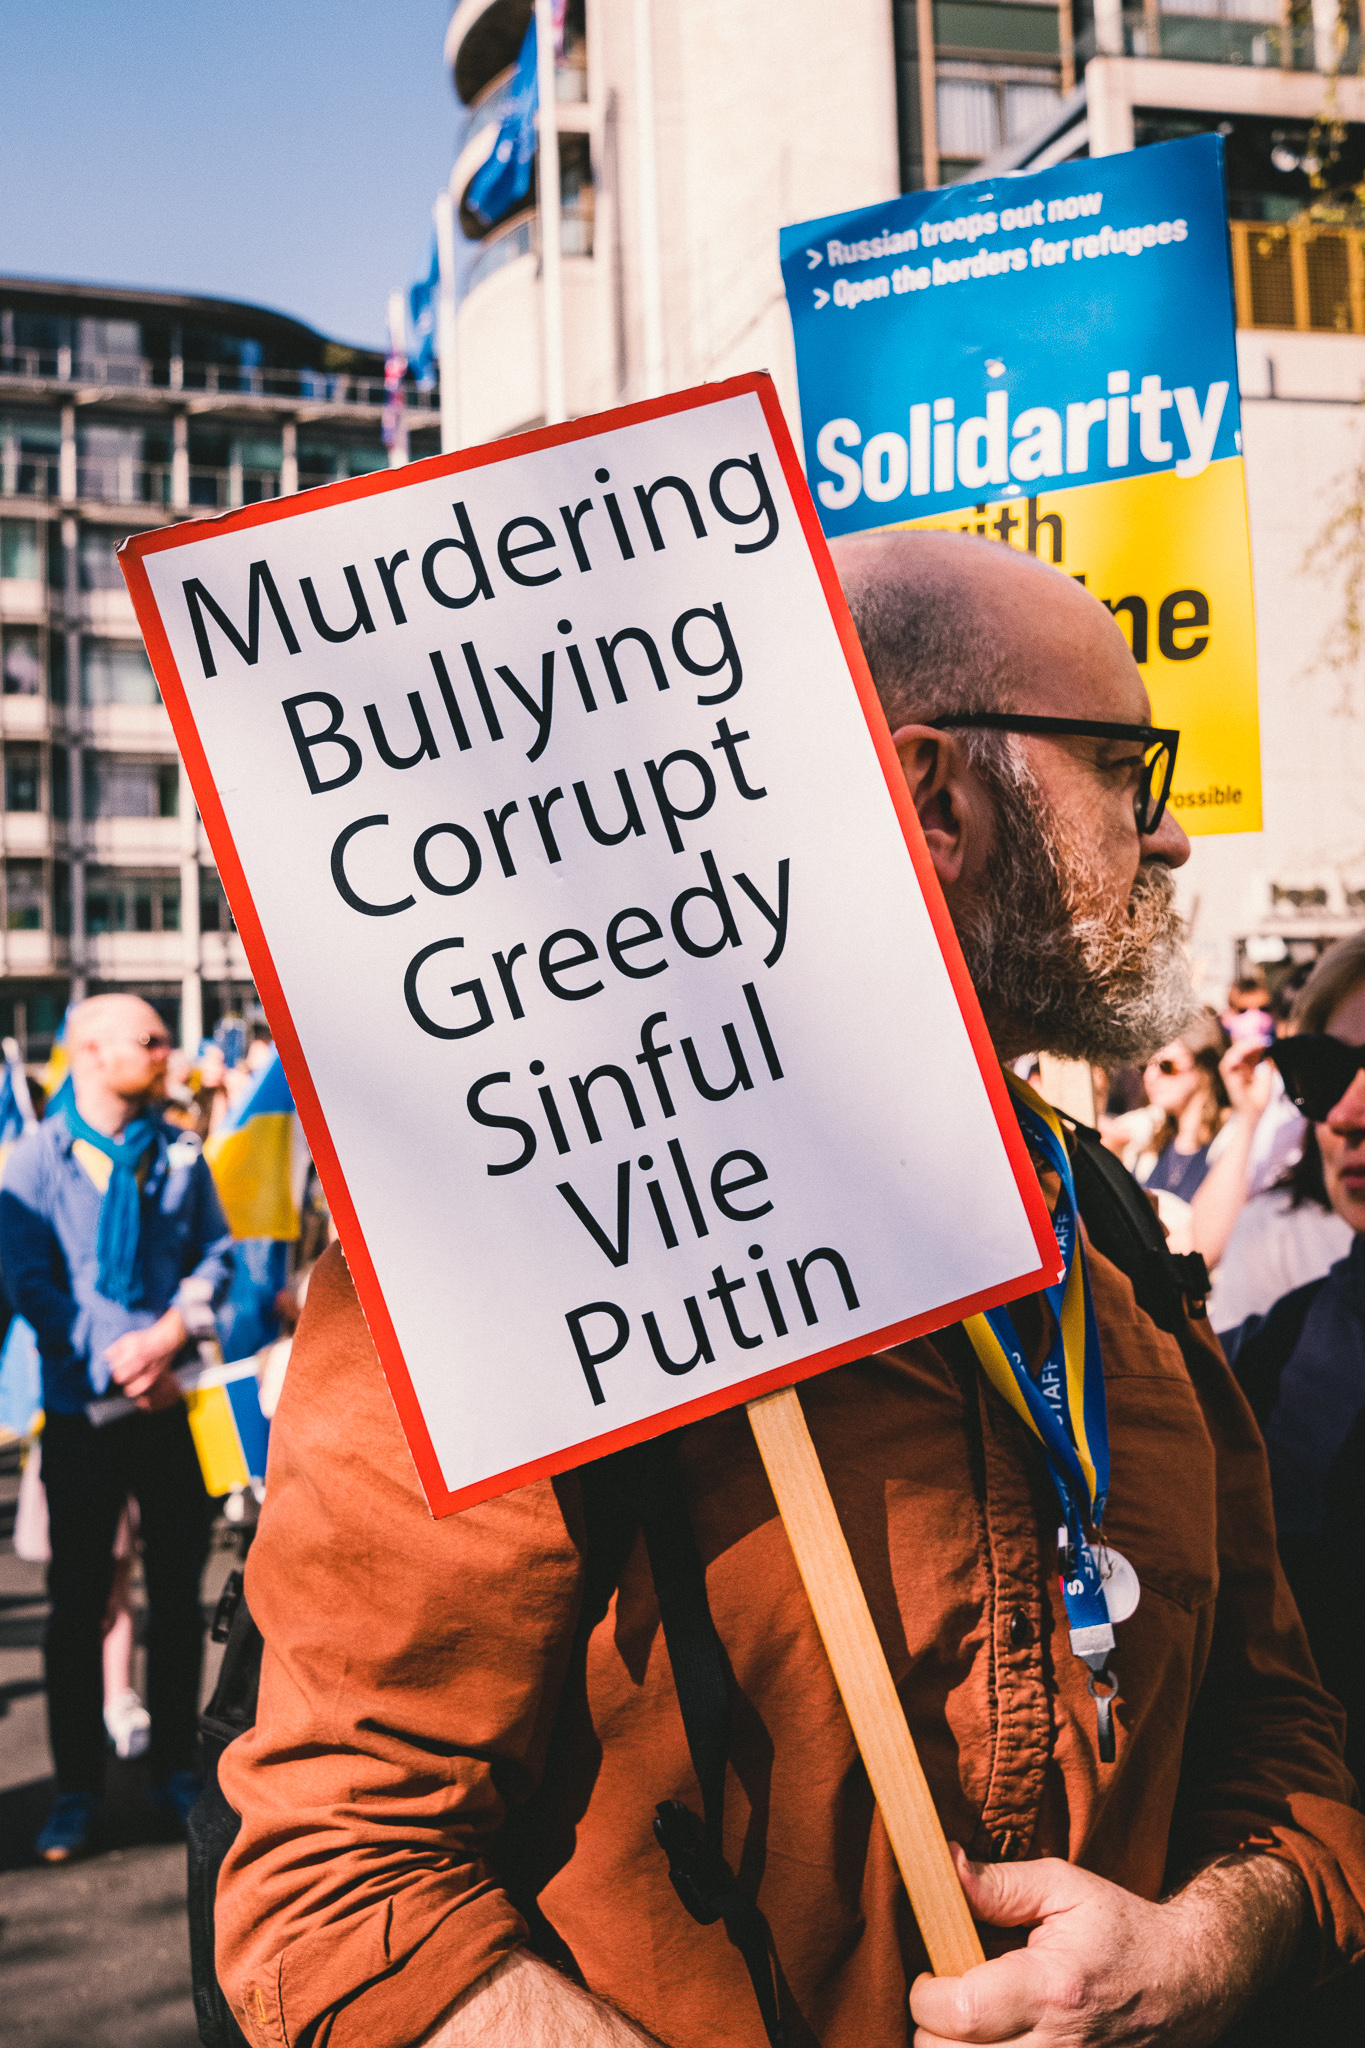 A banner that reads: “Murdering Bullying Corrupt Greedy Sinful Vile Putin” at the solidarity march in London